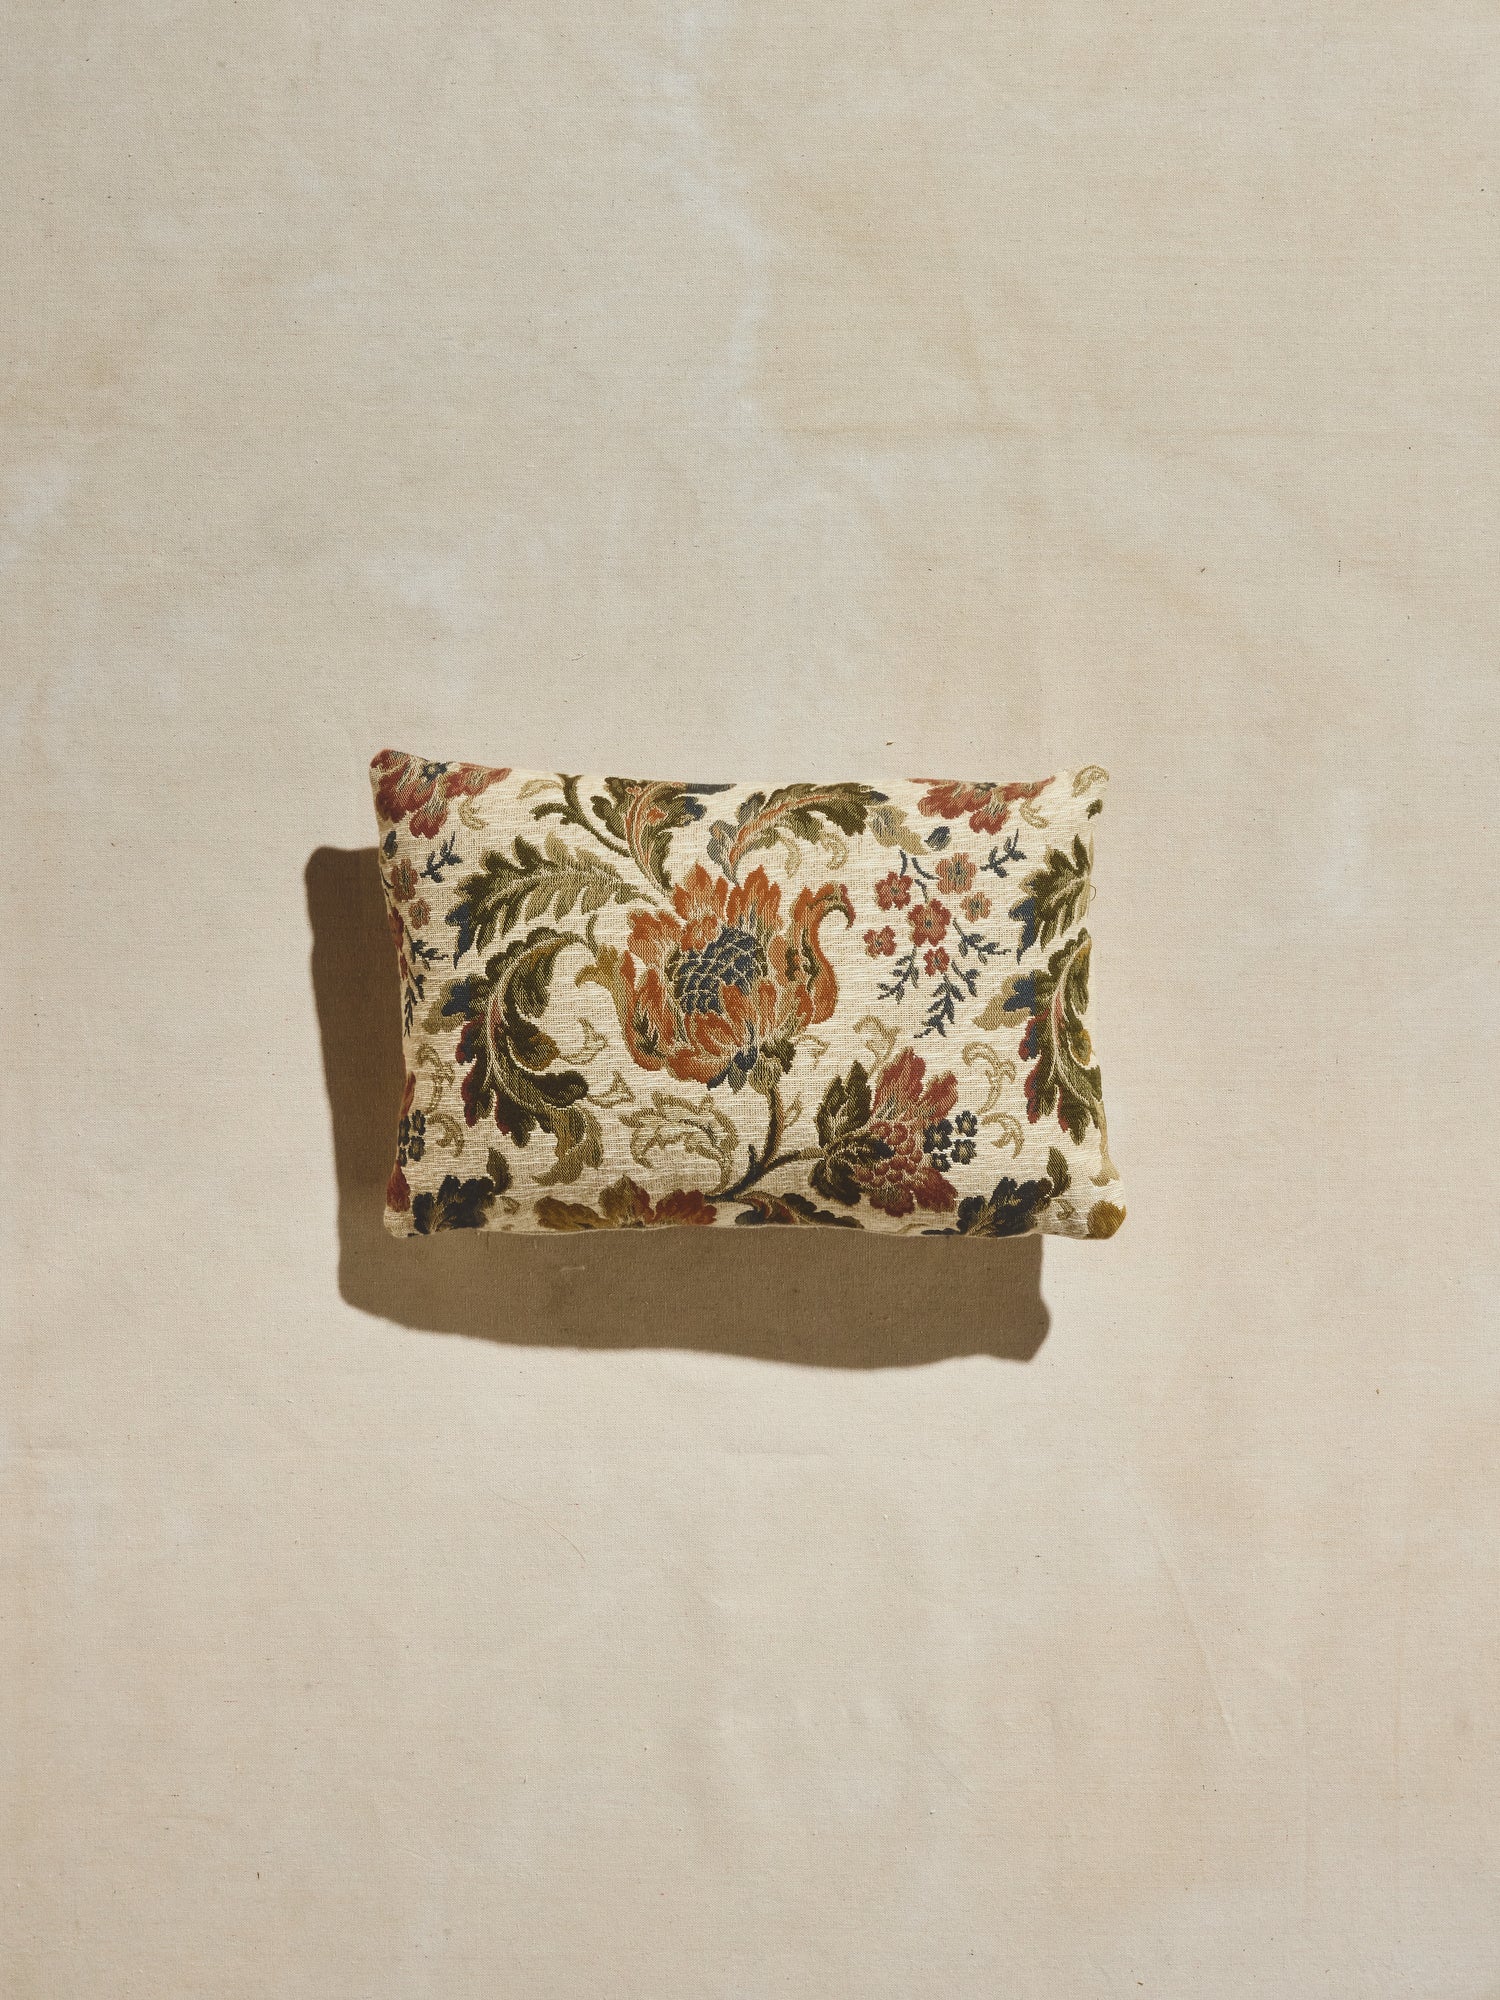 Vintage style floral pattern on our woven rectangular Primavera pillow and down feather blend insert.